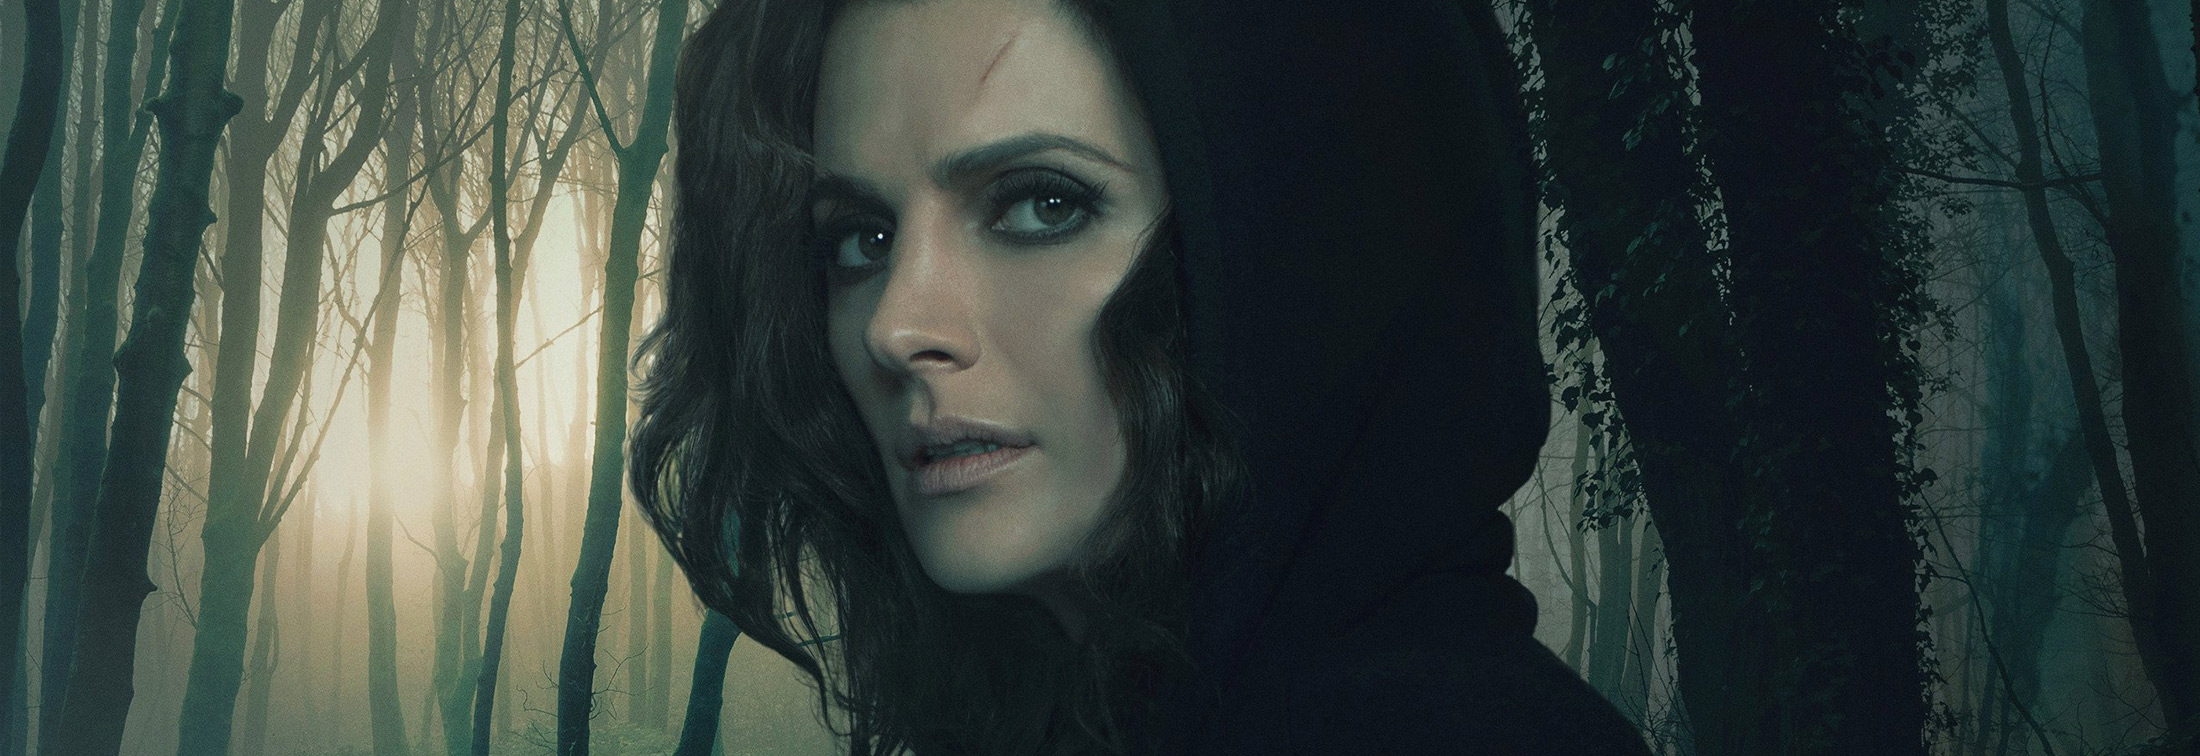 Absentia Season 1 - Search for the truth